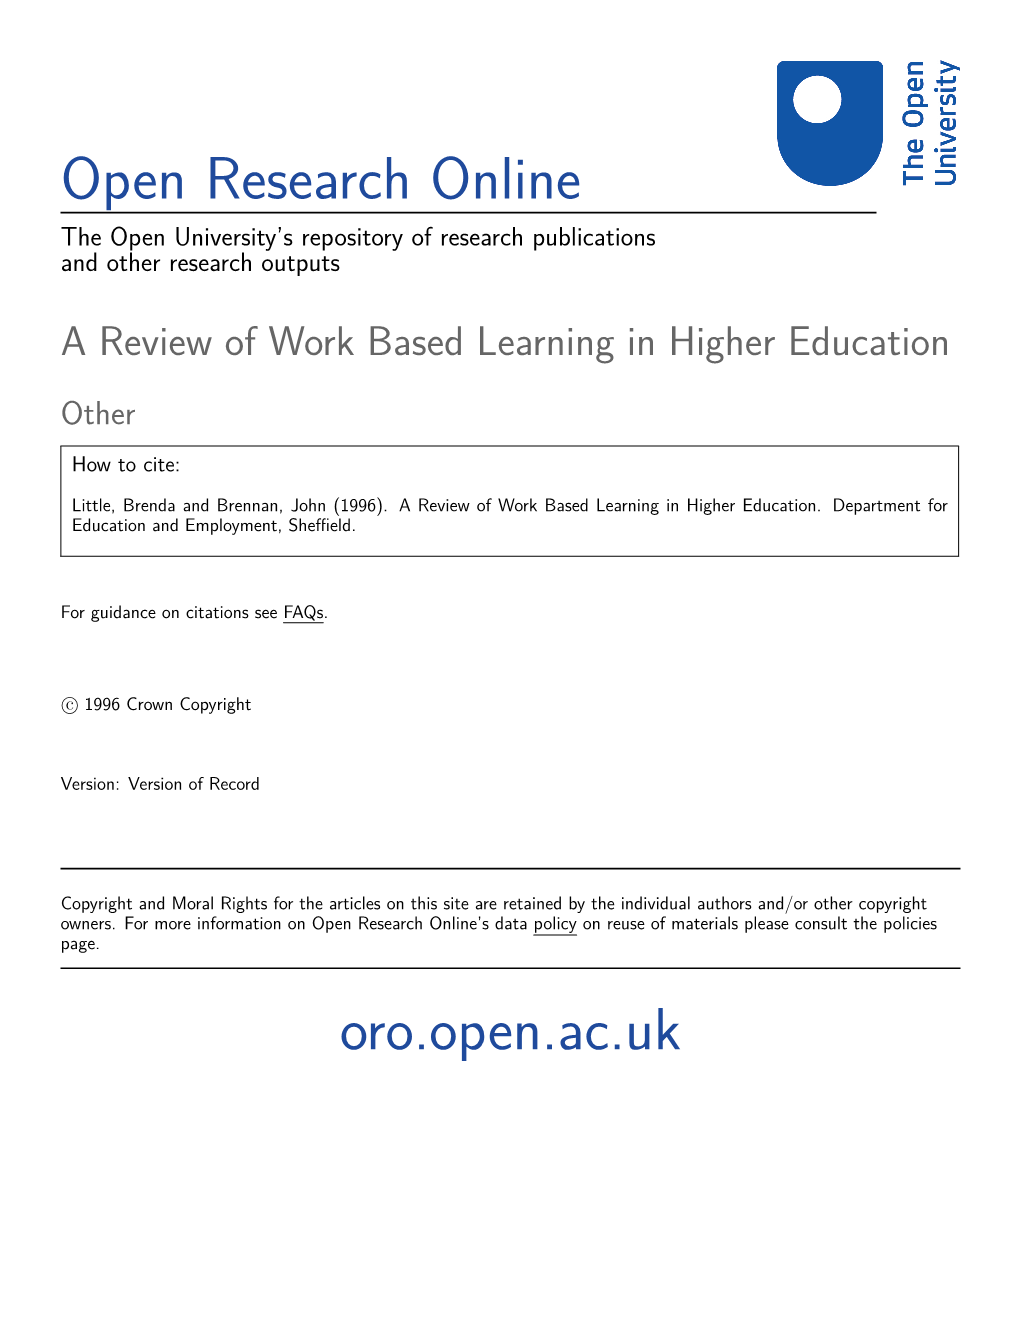 Work Based Learning and Higher Education